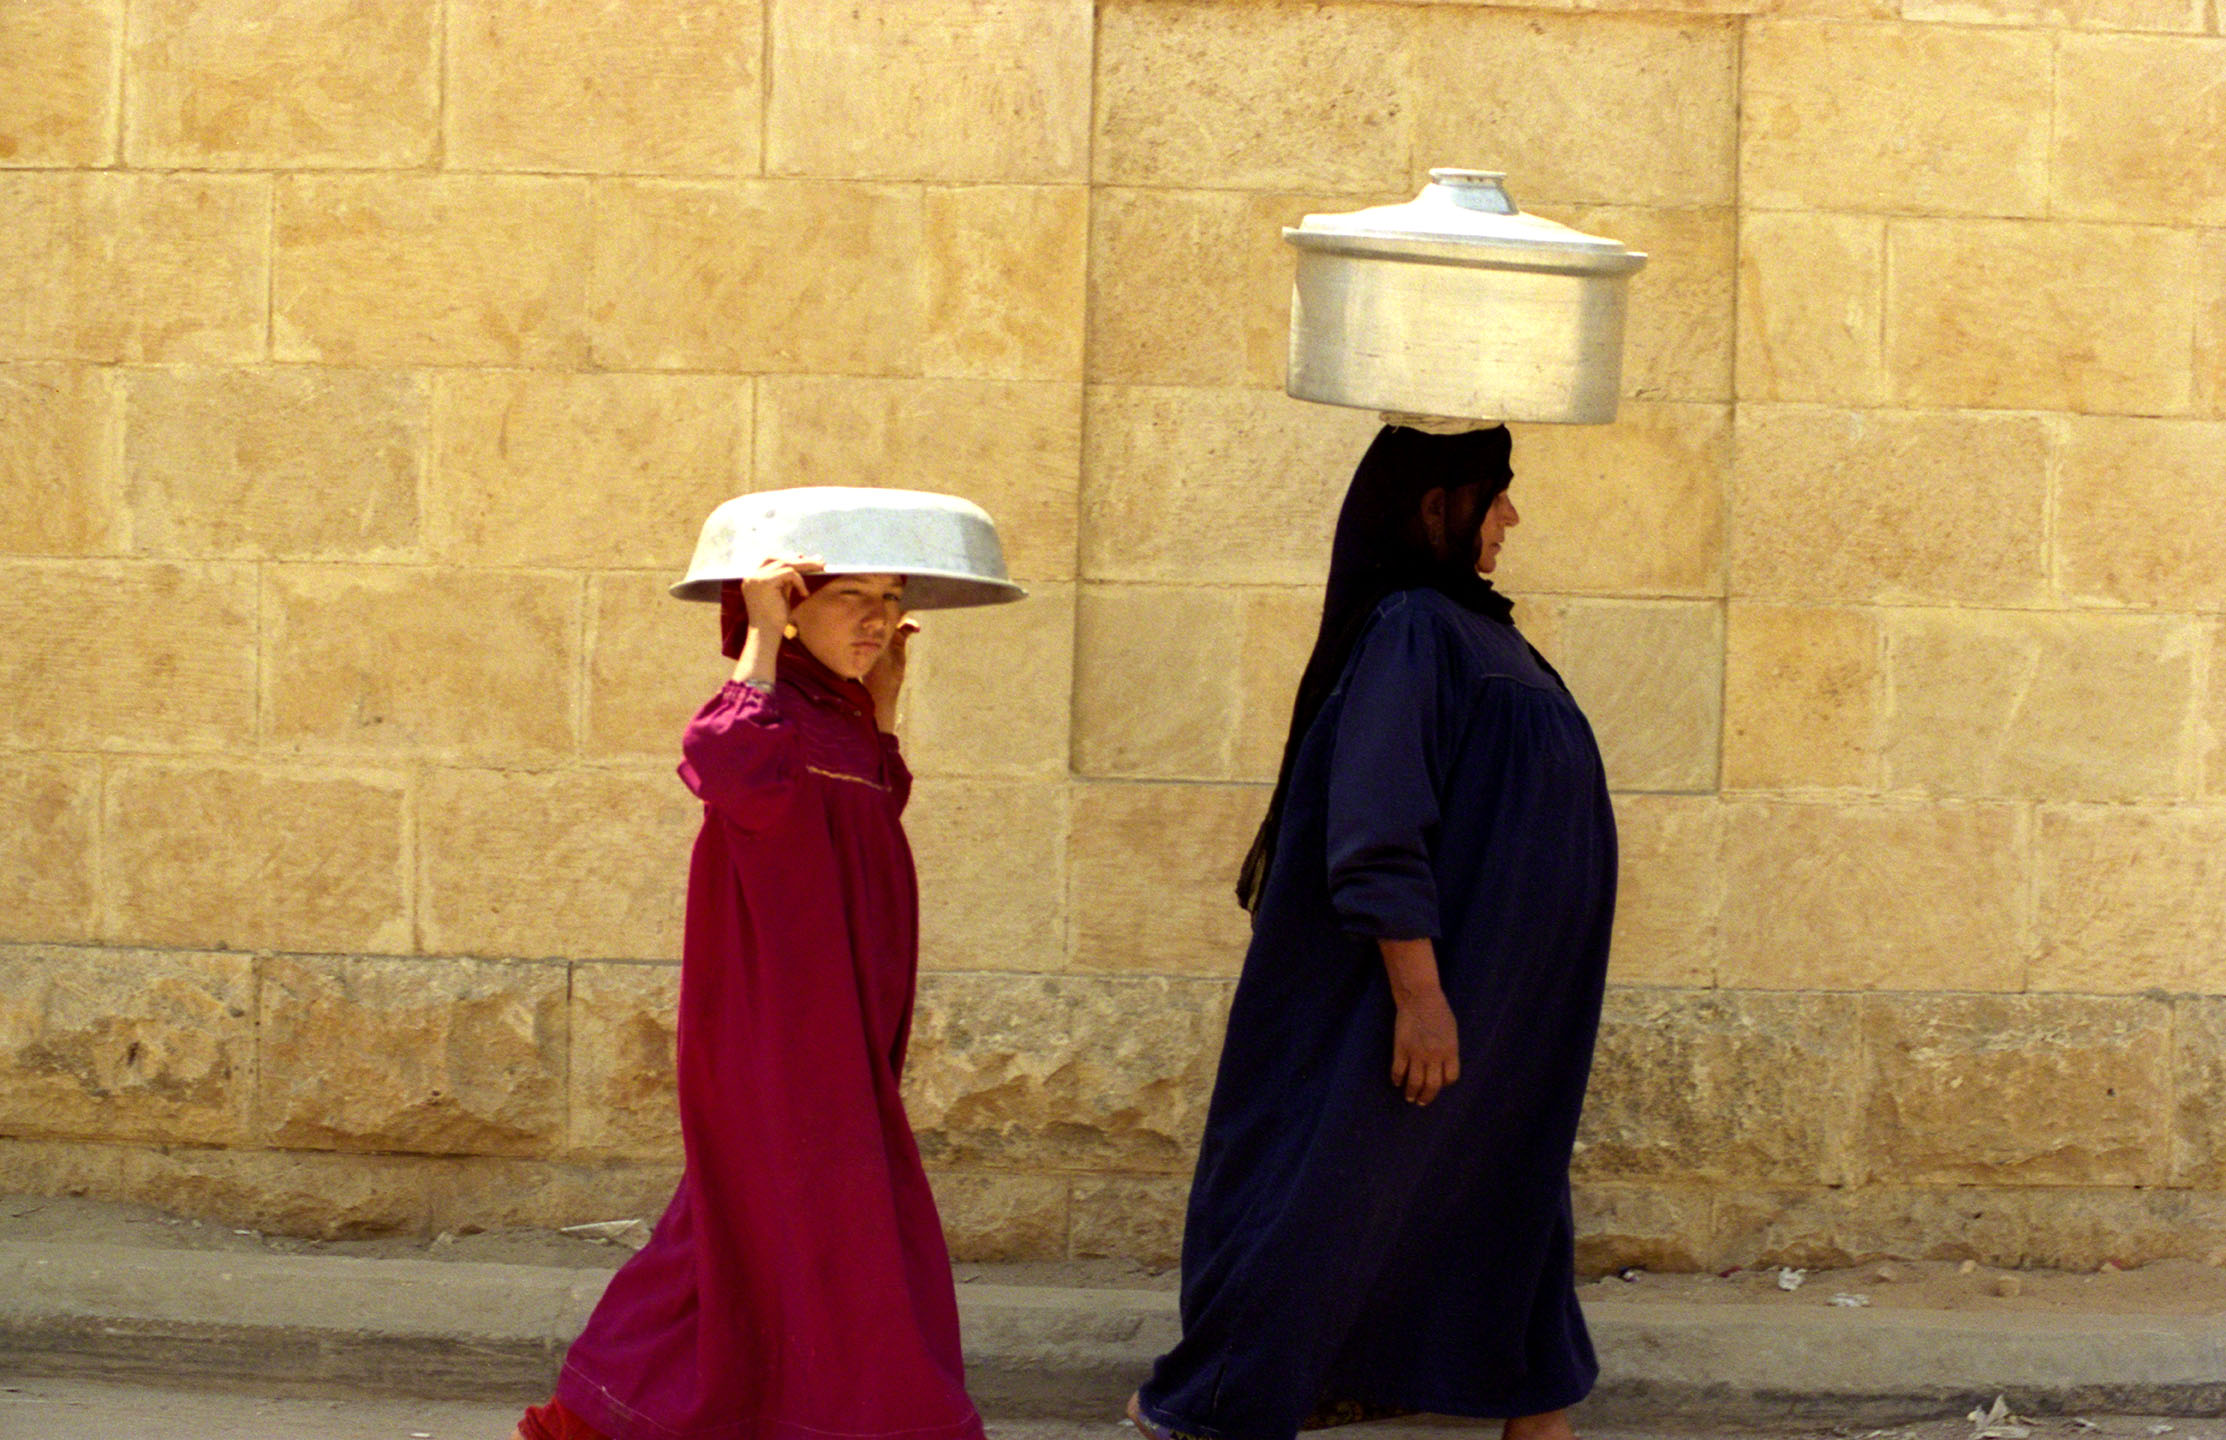 Woman and Child Carrying on their Heads, Cairo, Egypt 2034W copy.jpg